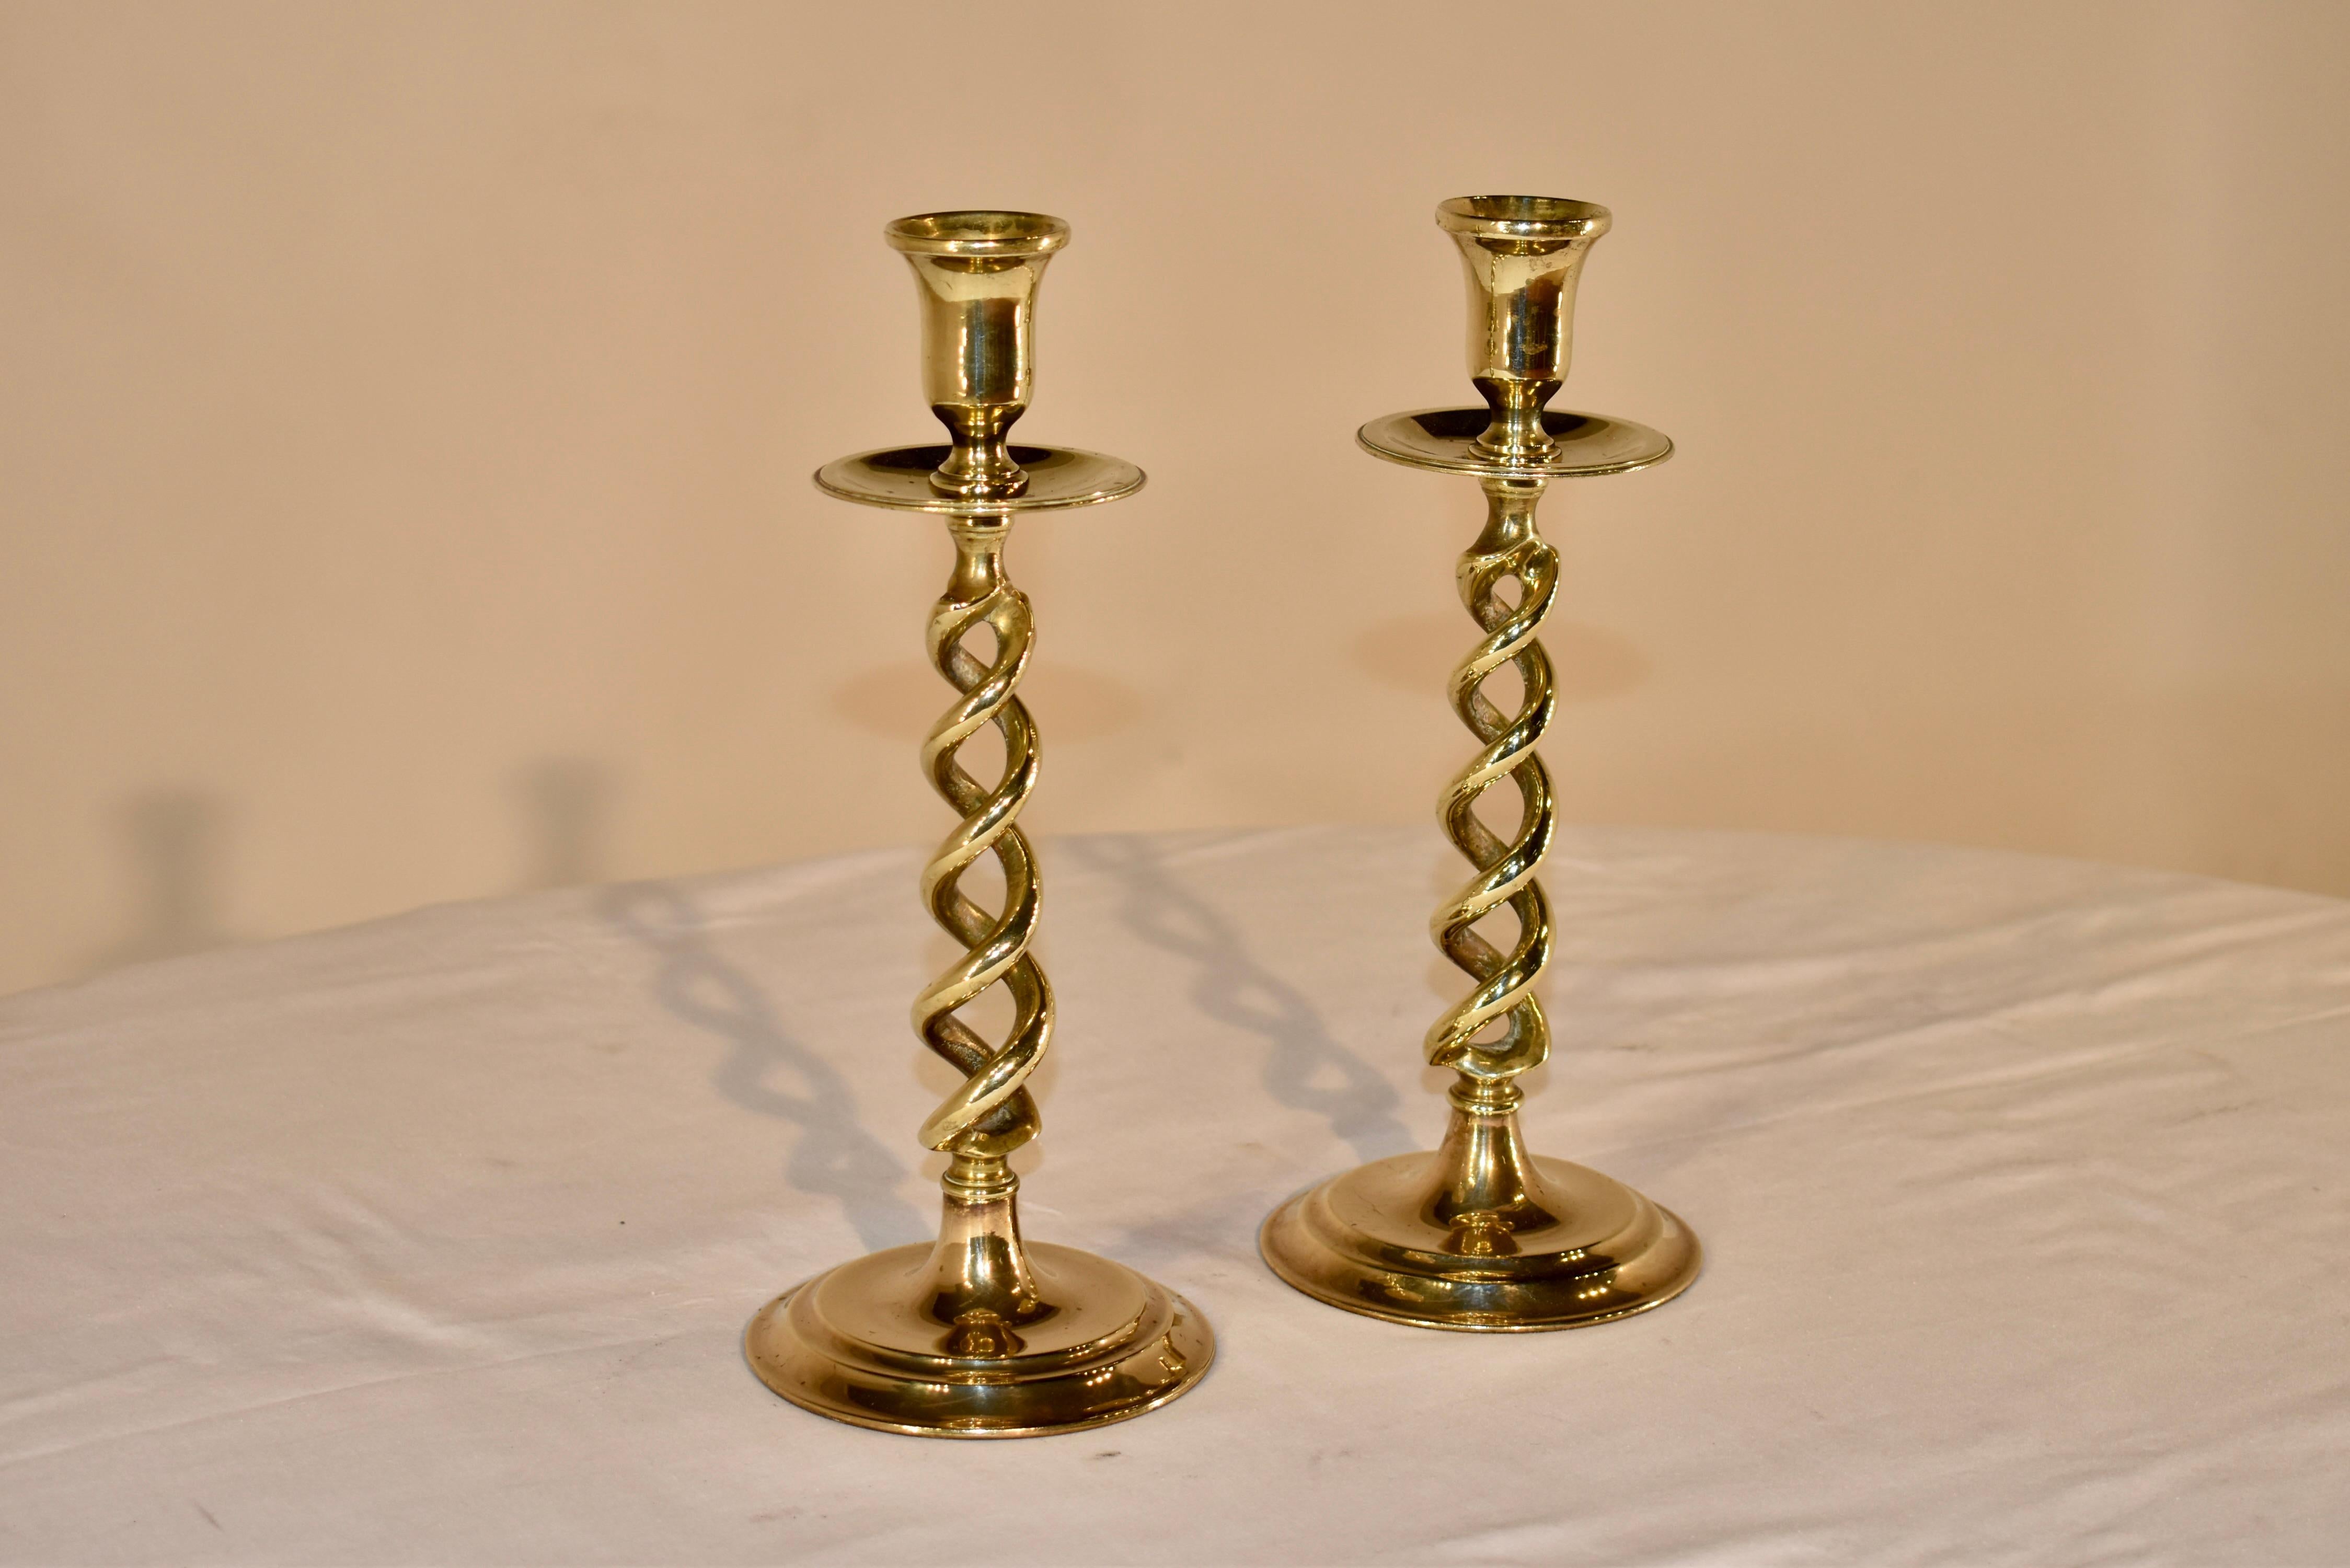 Pair of 19th century brass candlesticks from England. The candle cups are tulip shaped and are sitting on top of a large bobeche with rolled edges. The stems of the candlesticks are in and open barley twist design, and resting on top of turned